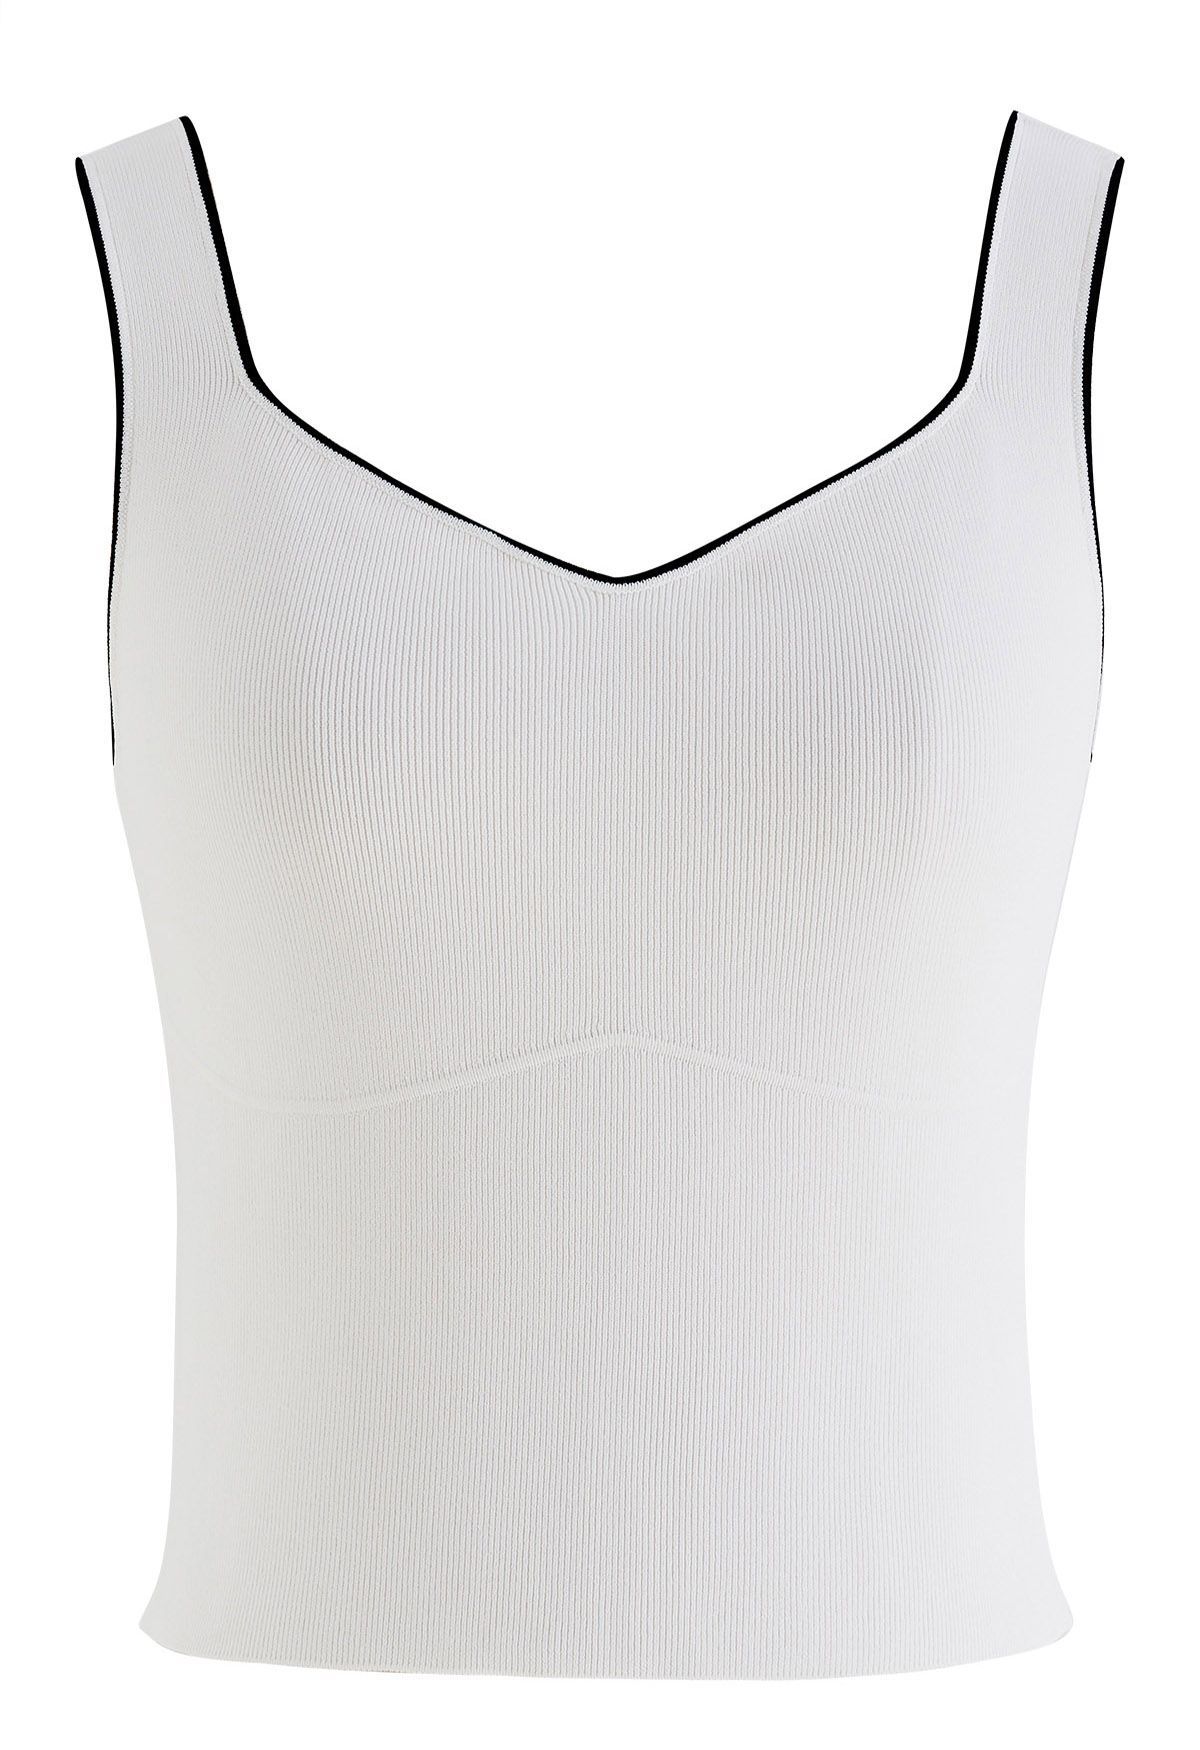 Contrast Edge Crop Tank Top in White | Chicwish